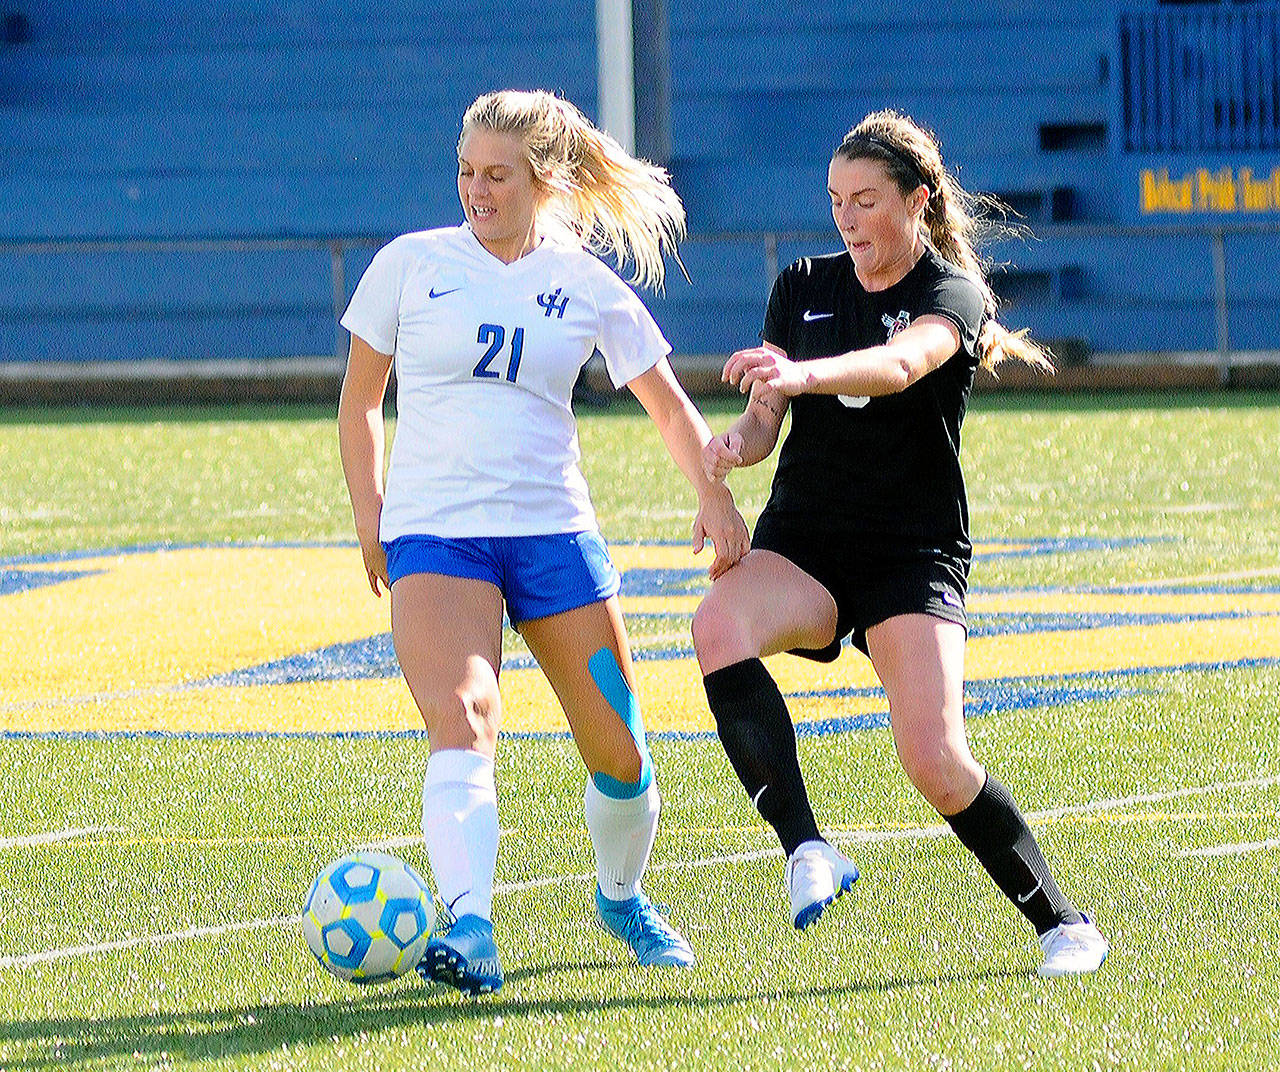 Grays Harbor’s Krislyn Koler, left, tries to shield the ball from Pierce’s Allison Cunningham in the second half of game on Saturday at Stewart Field in Aberdeen. (Hasani Grayson | Grays Harbor News Group)